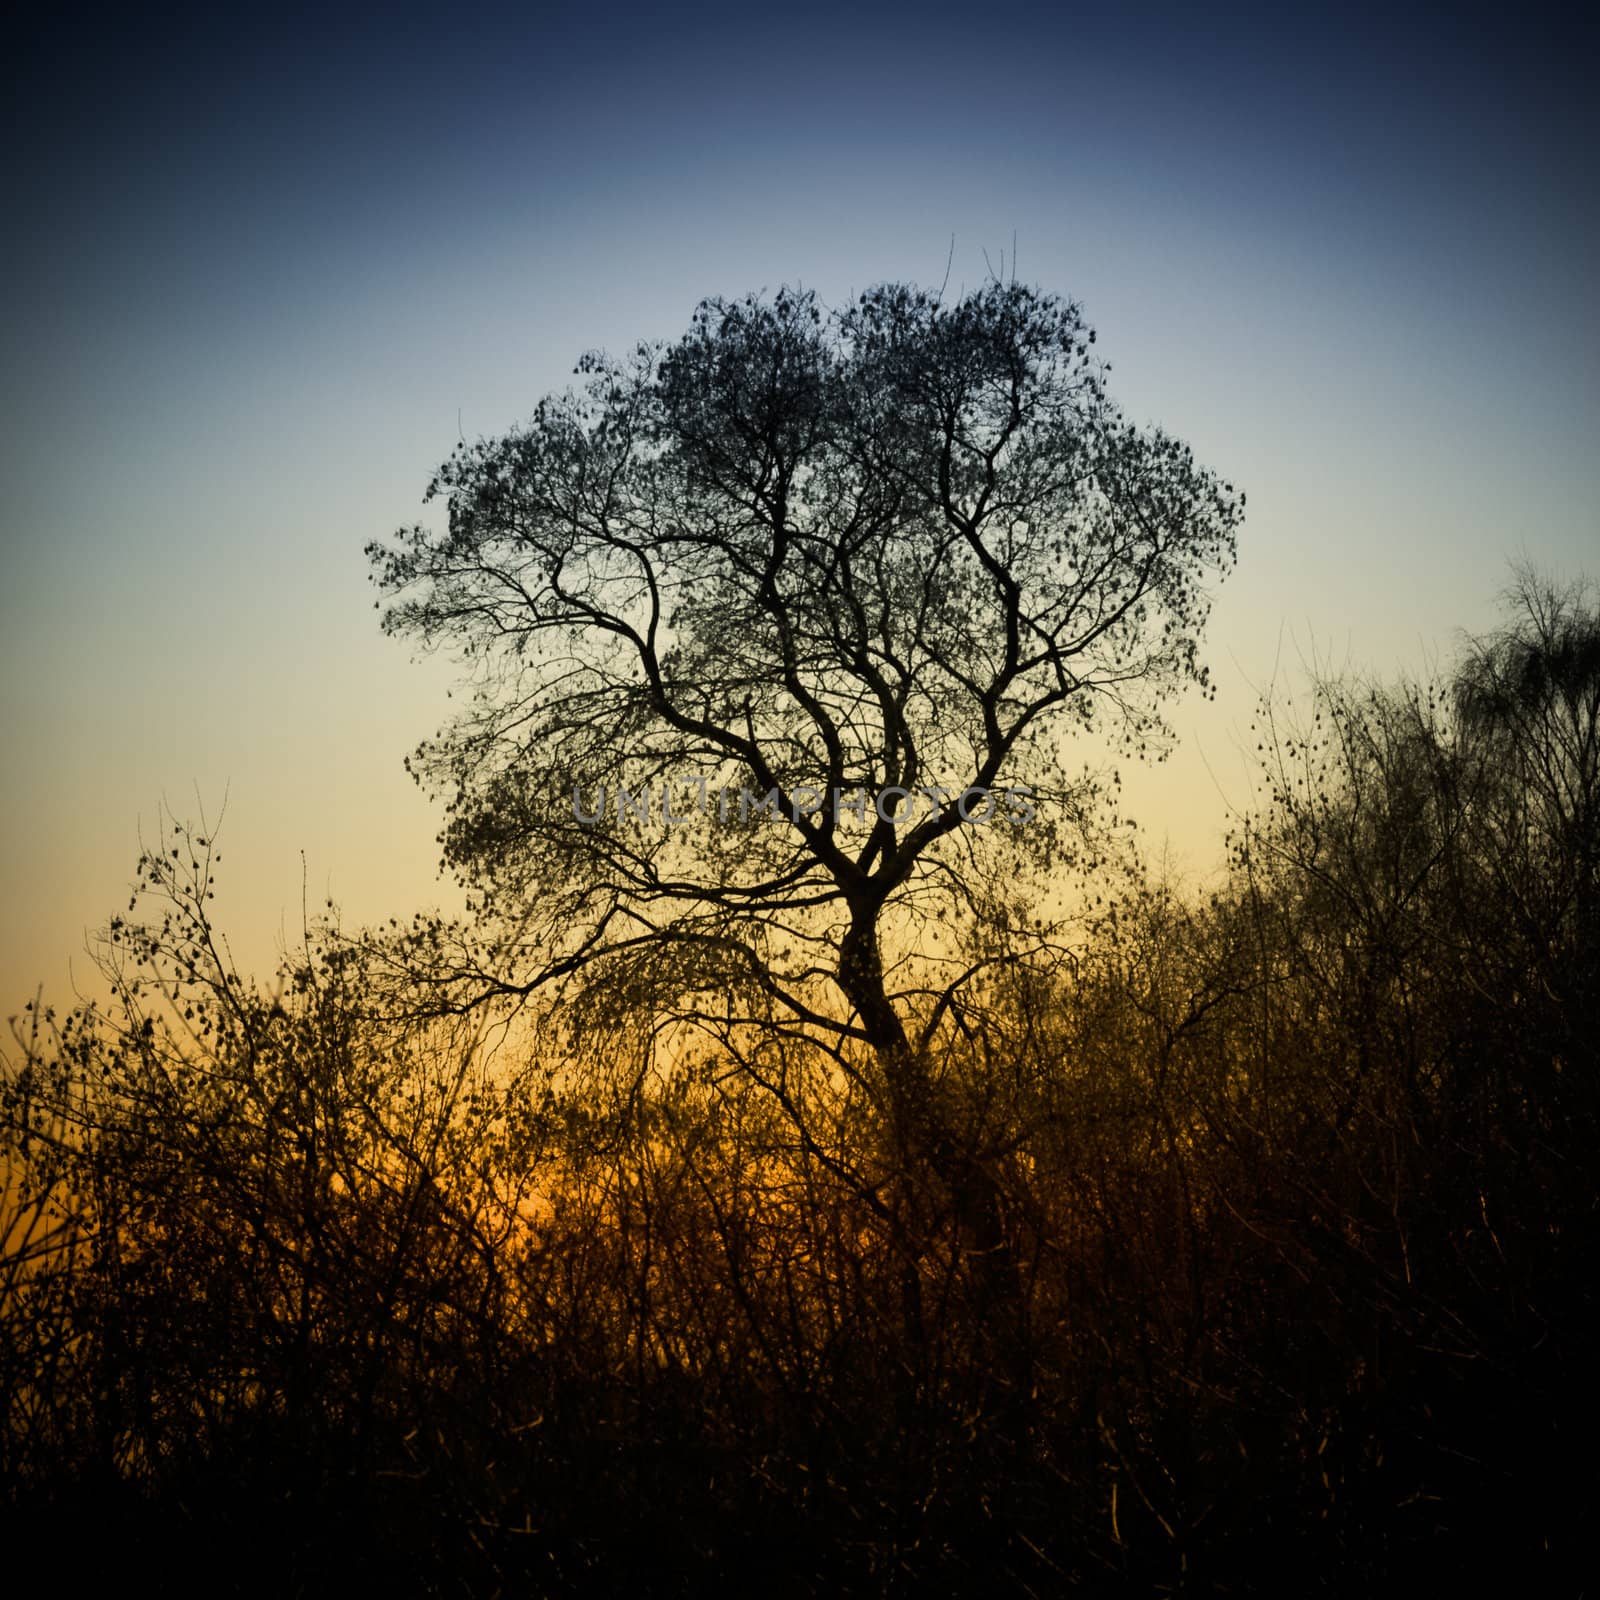 Tree Silhouette At Sunset by pashabo